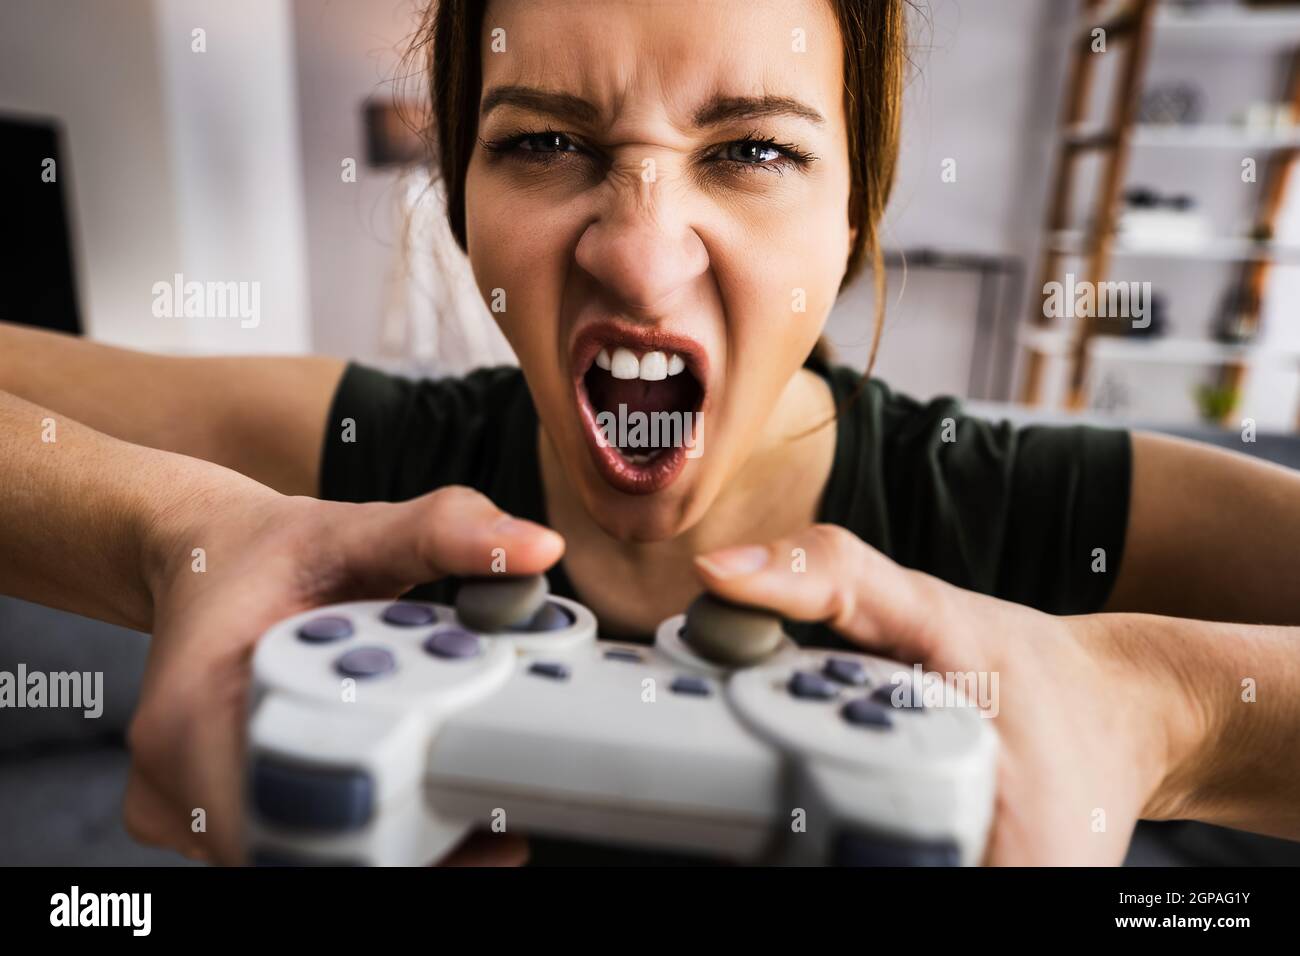 Female Gaming Addiction. Player With Console Controller Stock Photo